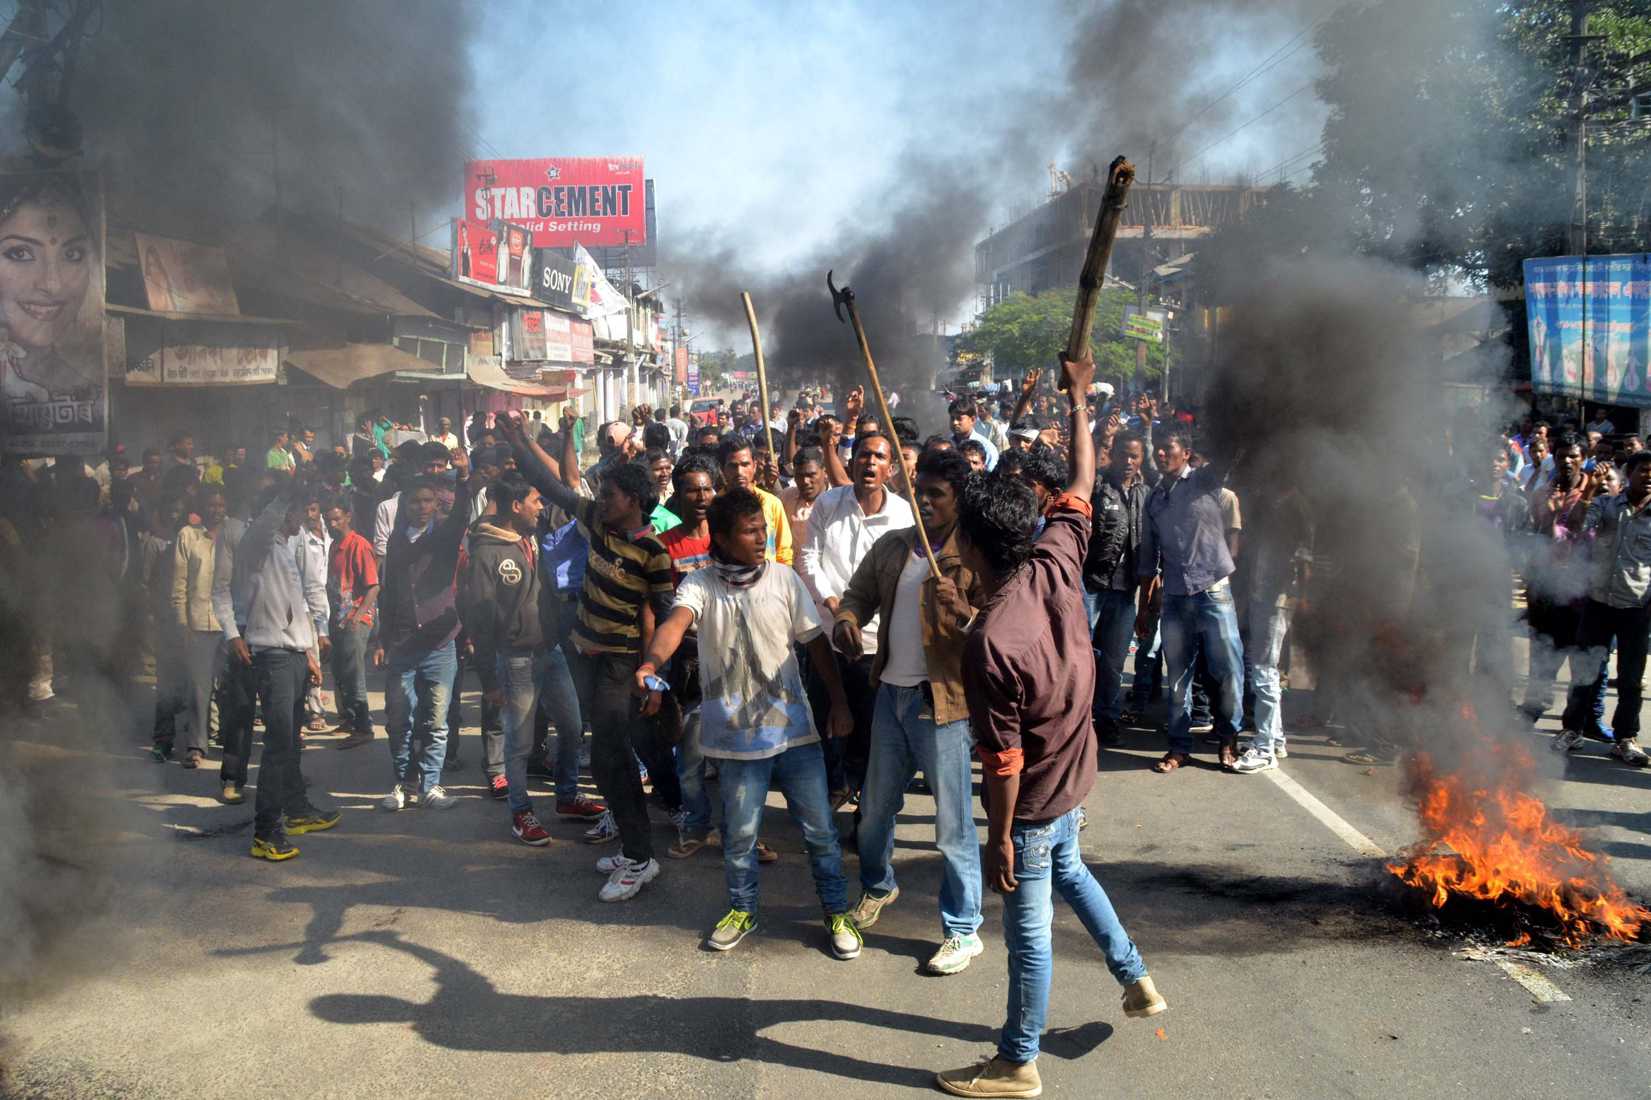 Activists of the Assam Tea Tribes Student Association (ATTSA) shout slogans as they block the road with burning tyres during a protest against attacks on villagers by militants in four different locations, at Biswanath Chariali in the Sonitpur district of northeastern Assam state on December 24, 2014 (STRDEL—AFP/Getty)